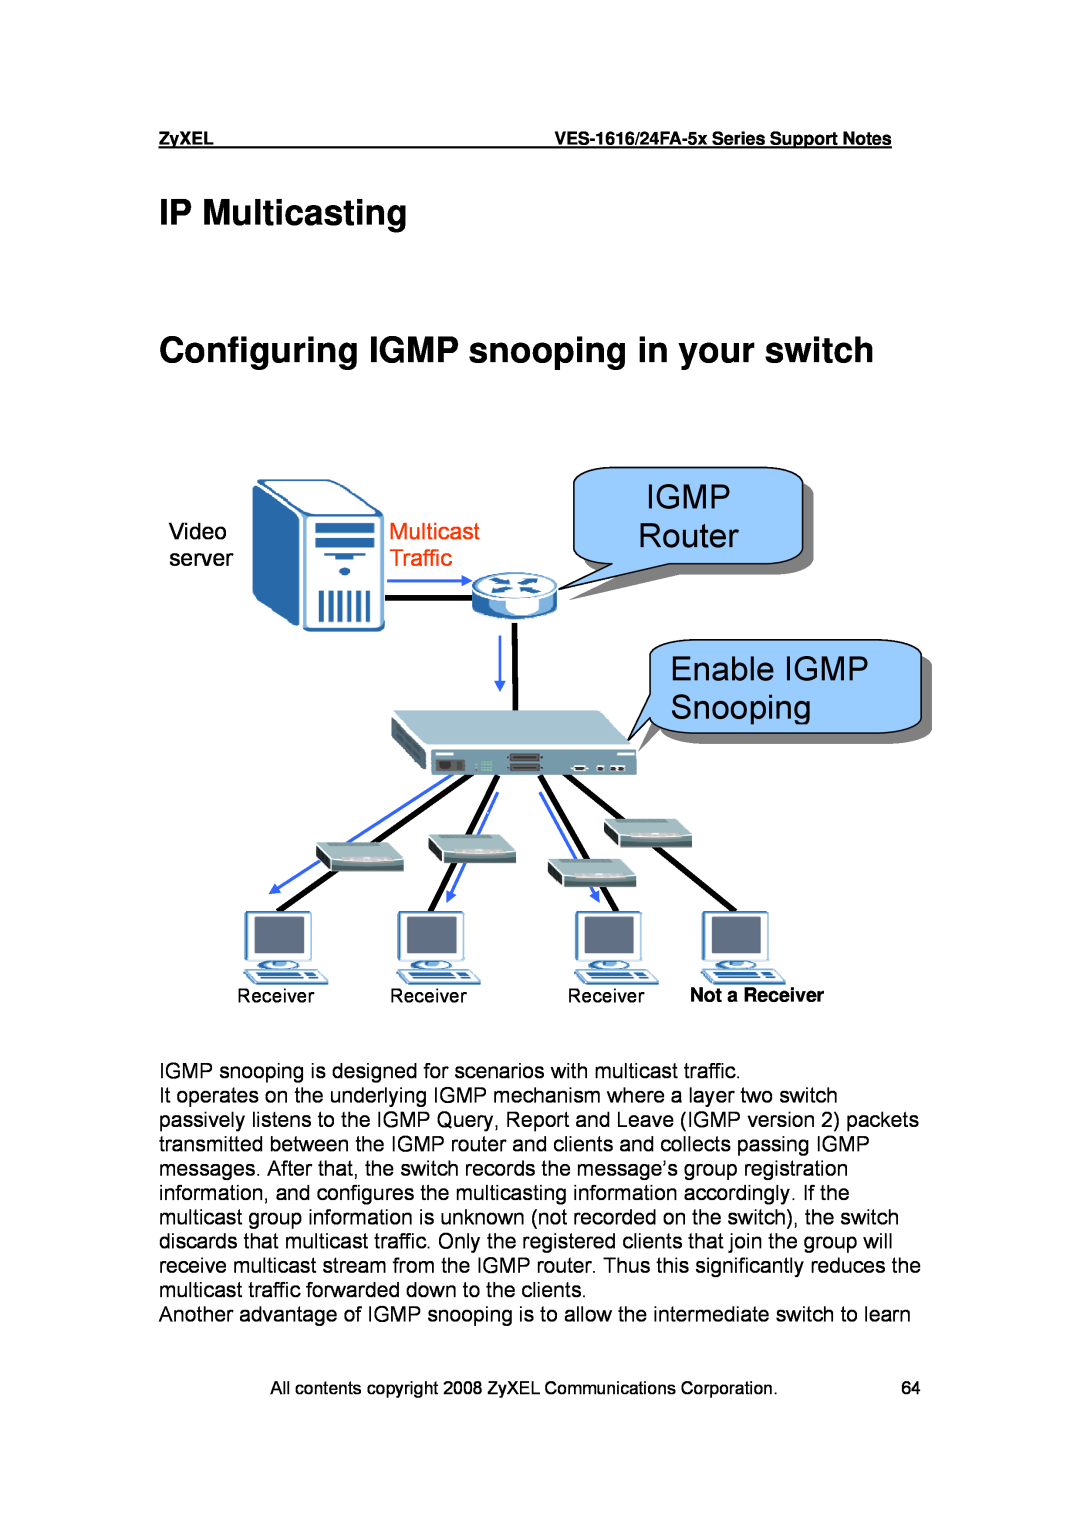 ZyXEL Communications VES-1616 IP Multicasting Configuring IGMP snooping in your switch, IGMP Router Enable IGMP Snooping 